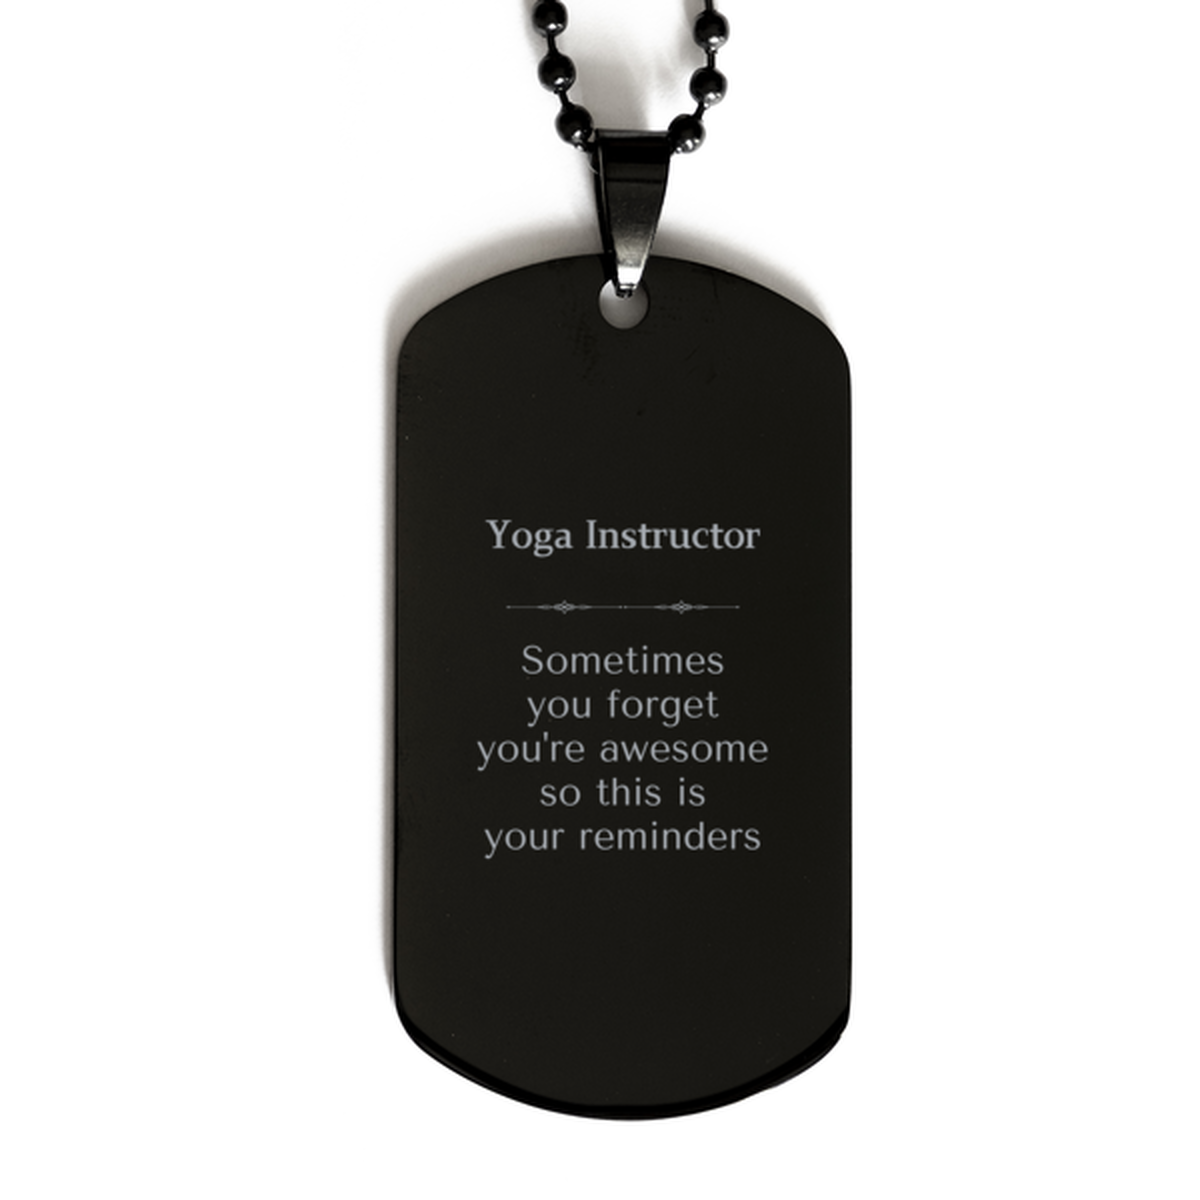 Sentimental Yoga Instructor Black Dog Tag, Yoga Instructor Sometimes you forget you're awesome so this is your reminders, Graduation Christmas Birthday Gifts for Yoga Instructor, Men, Women, Coworkers